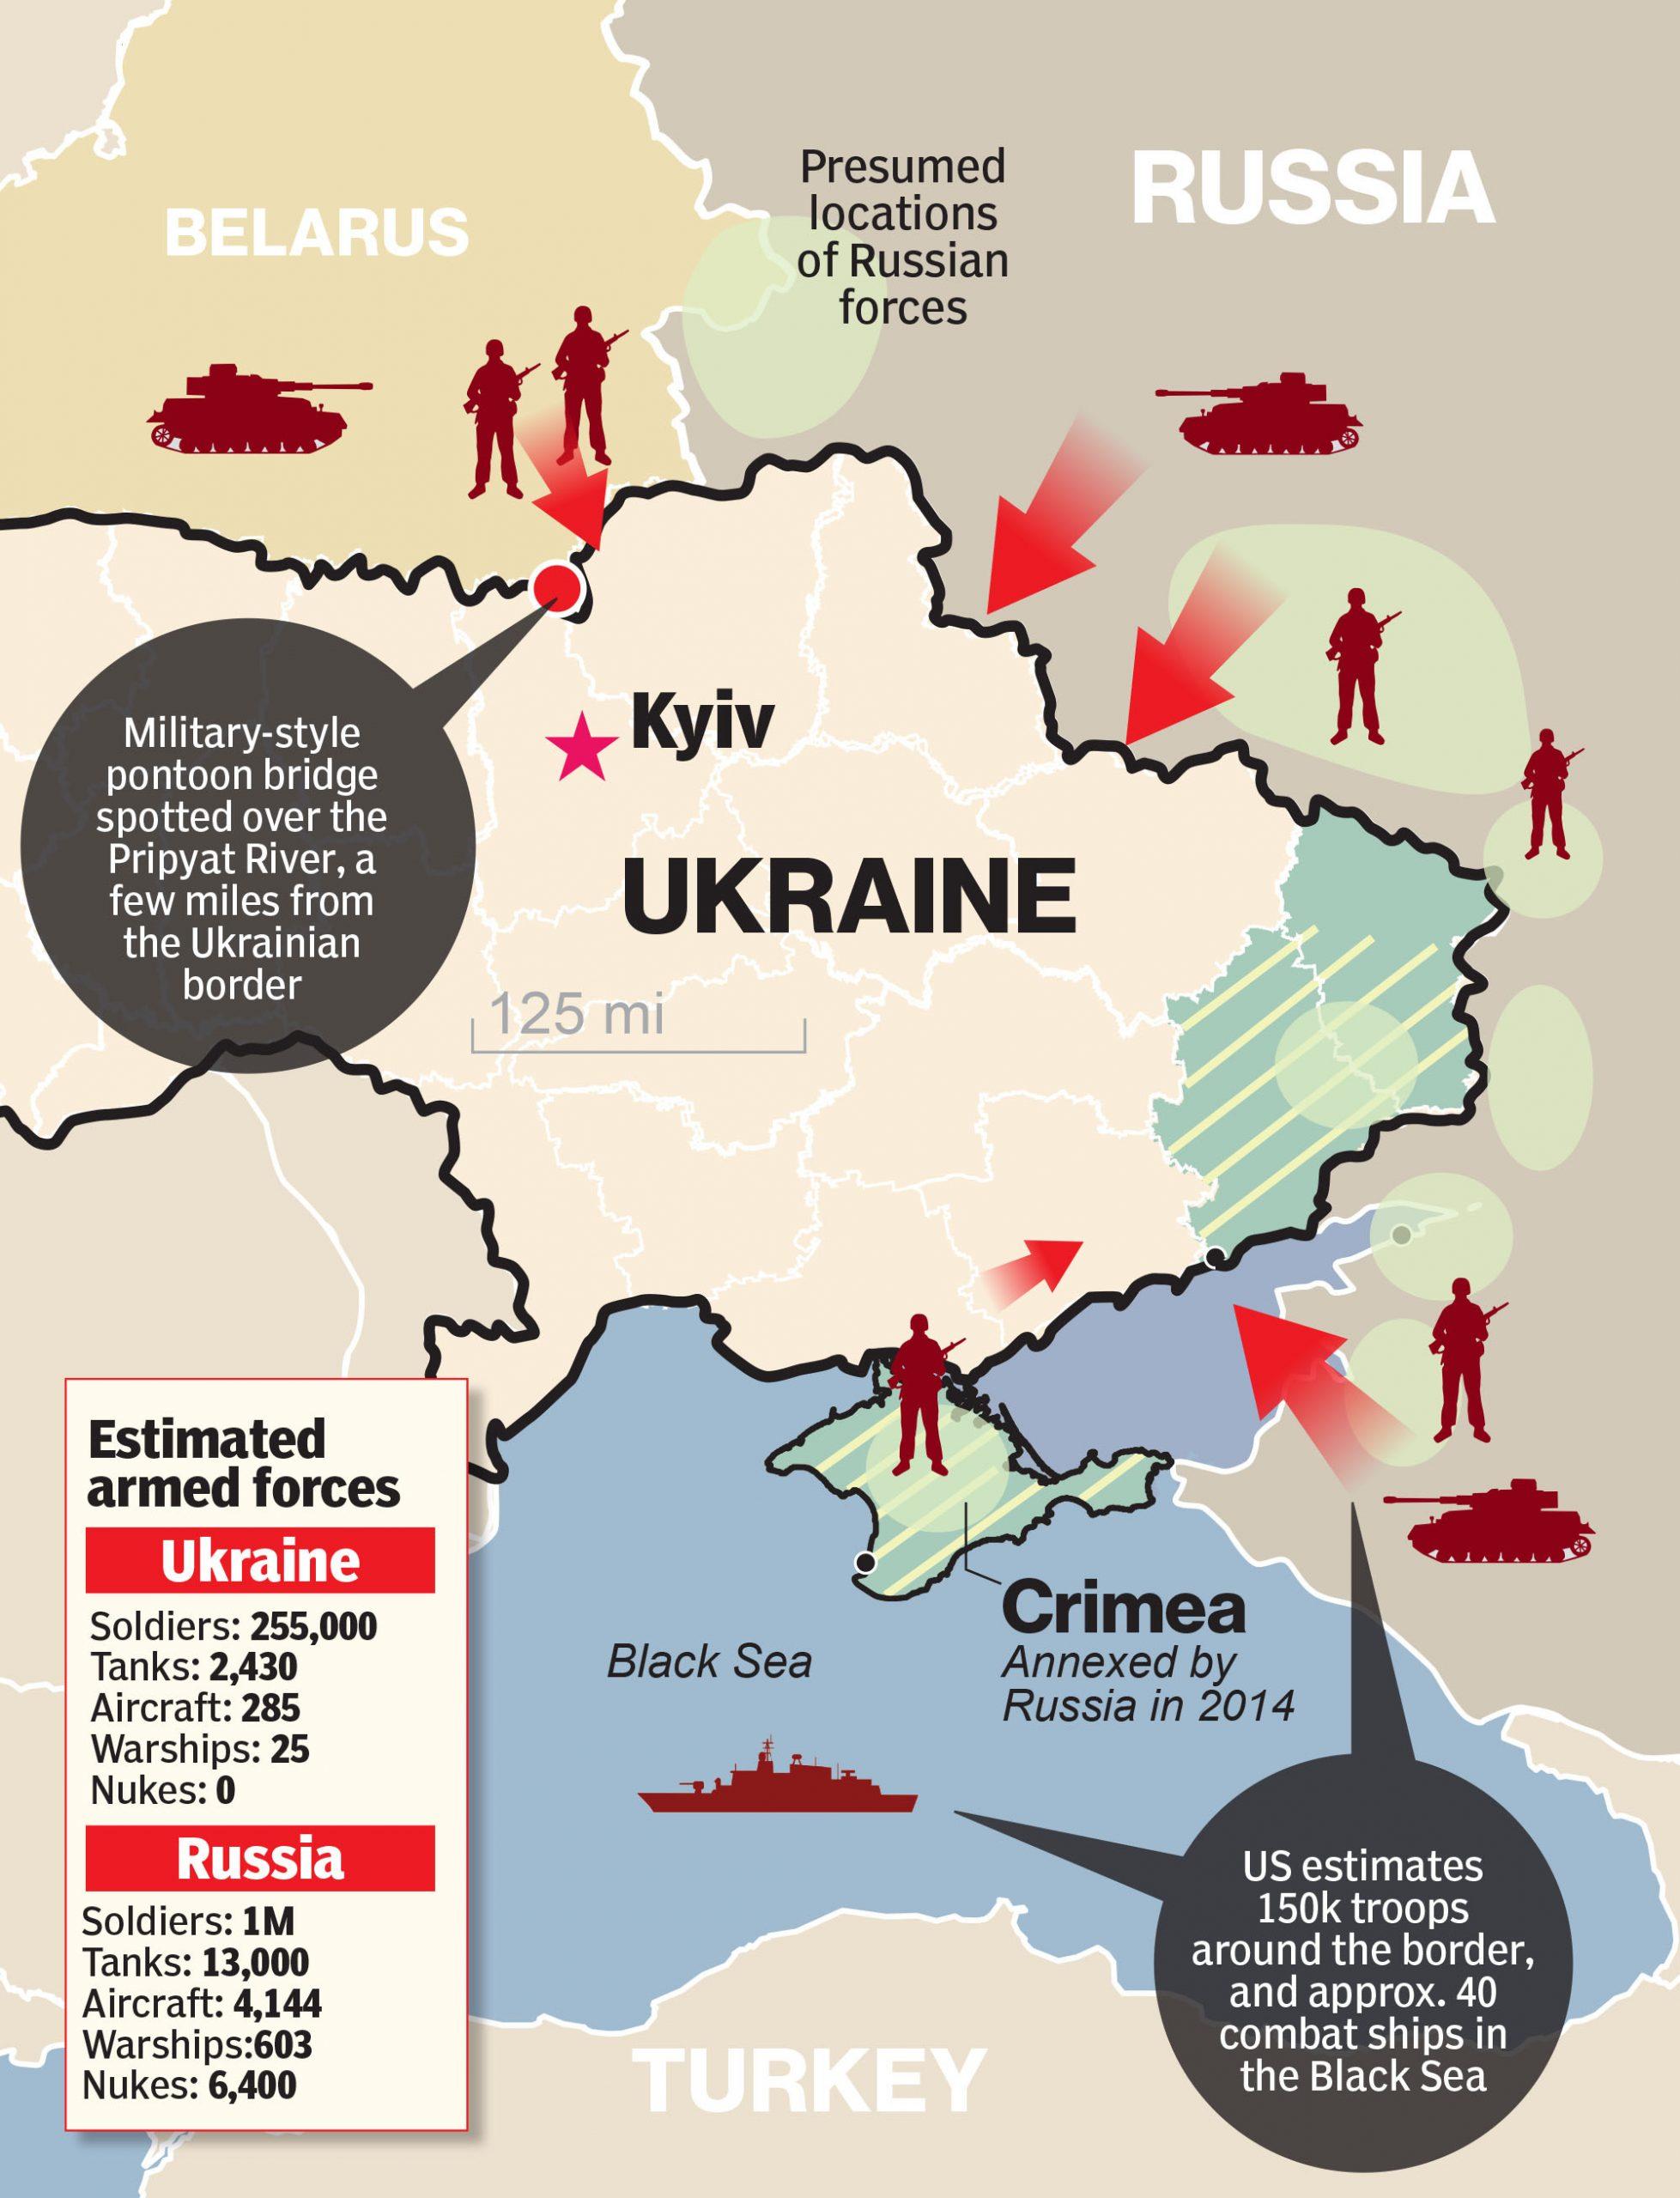 Ukraine And Russia Conflict Explained: Attack On Ukraine By Russia is potentially onset of war in Europe_40.1